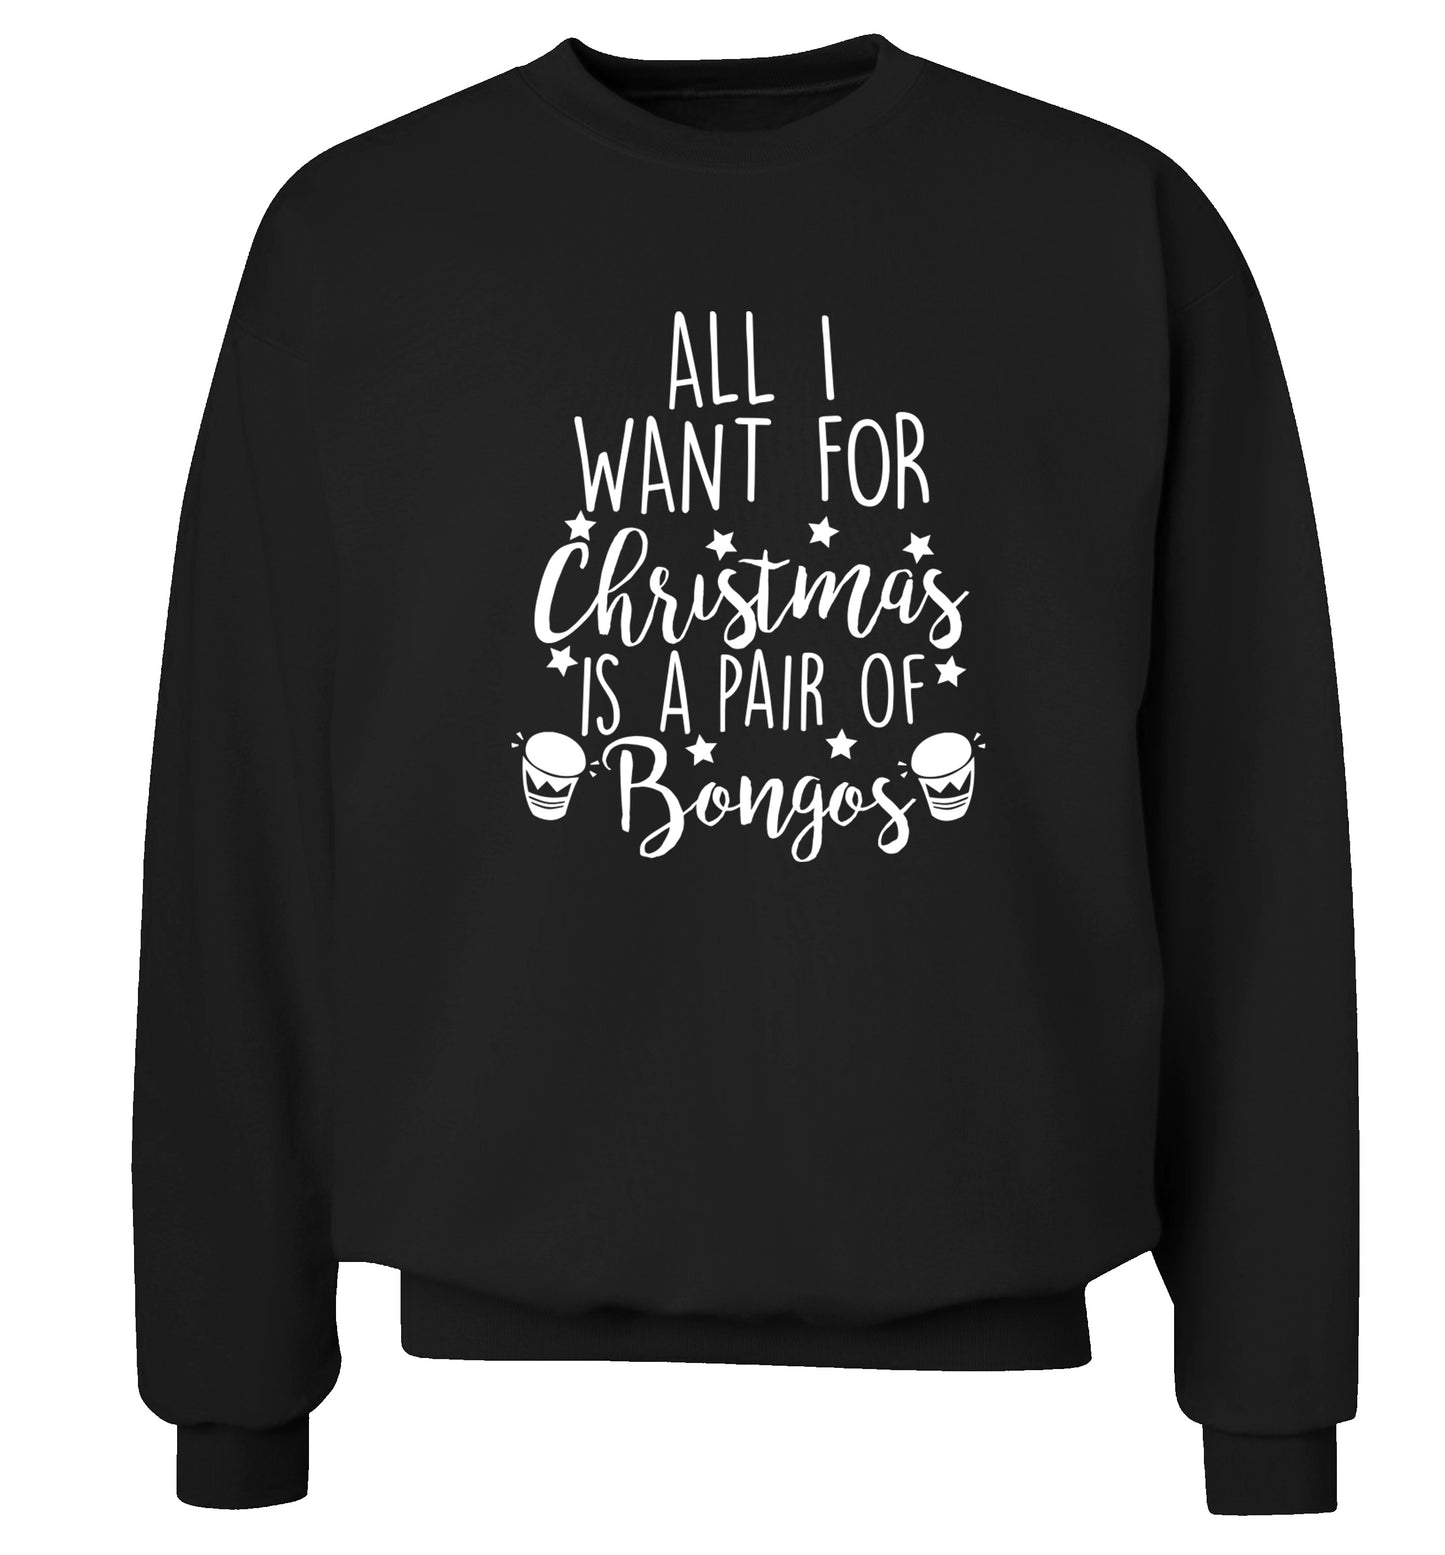 All I want for Christmas is a pair of bongos! Adult's unisex black Sweater 2XL